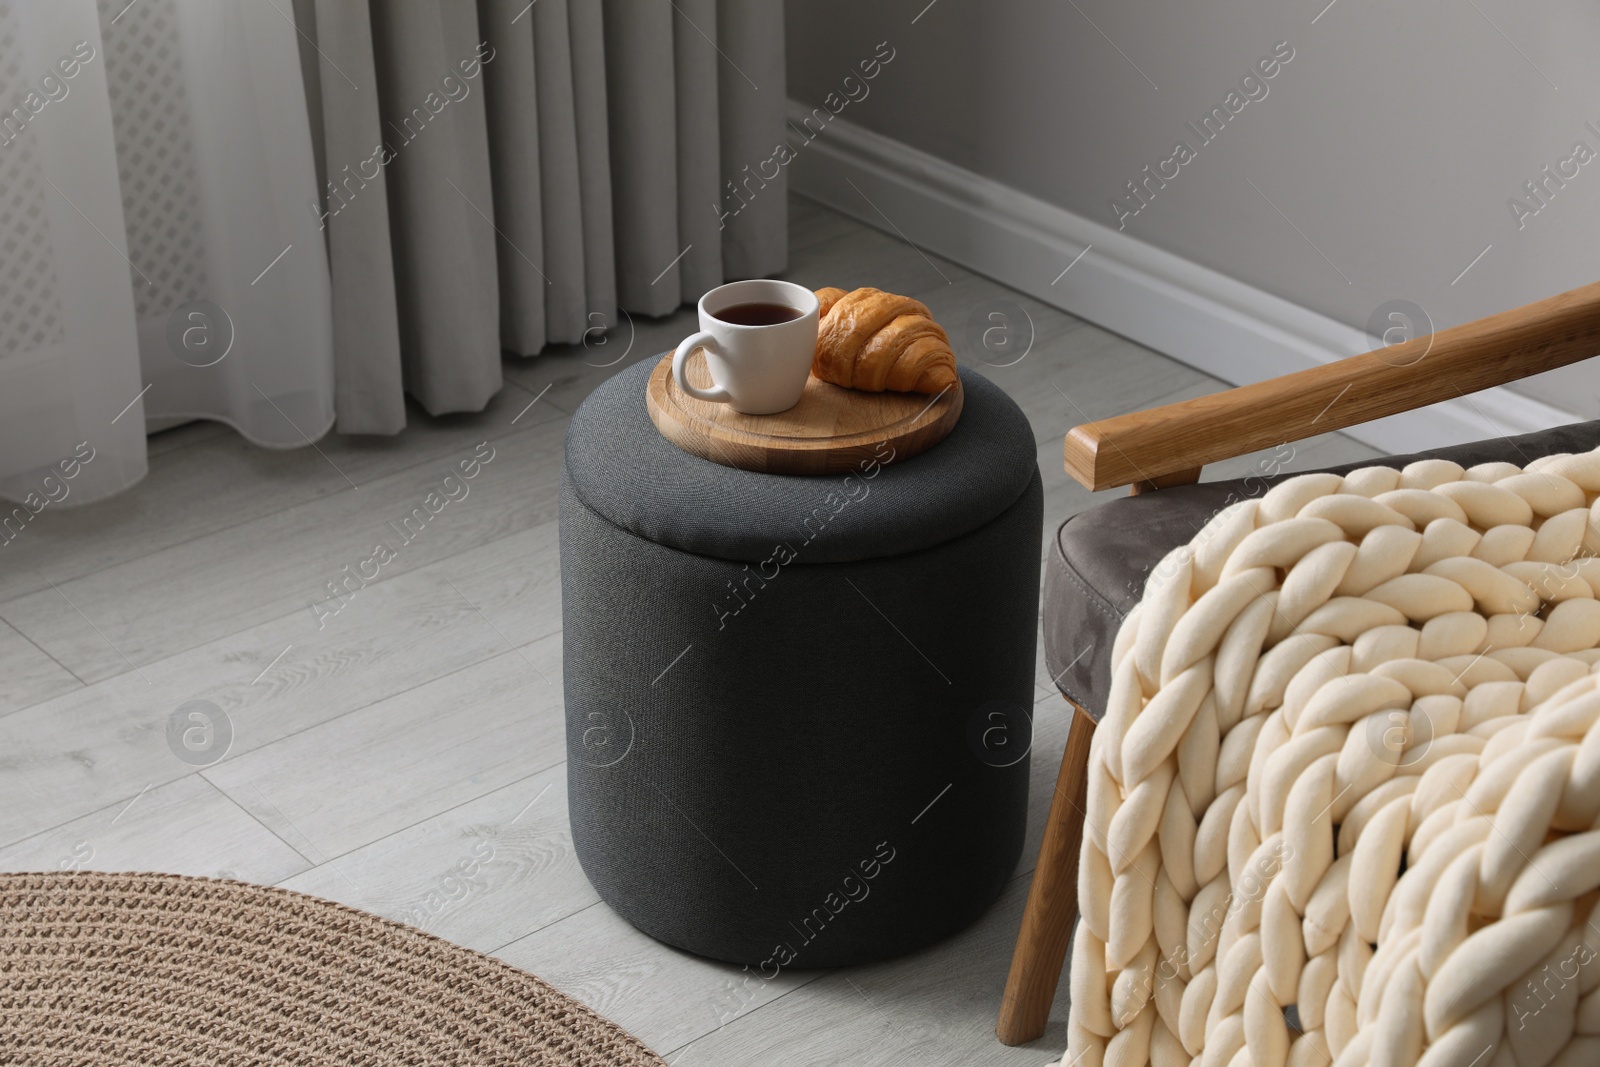 Photo of Tray with cup of tea and croissant on stylish ottoman in room. Interior design